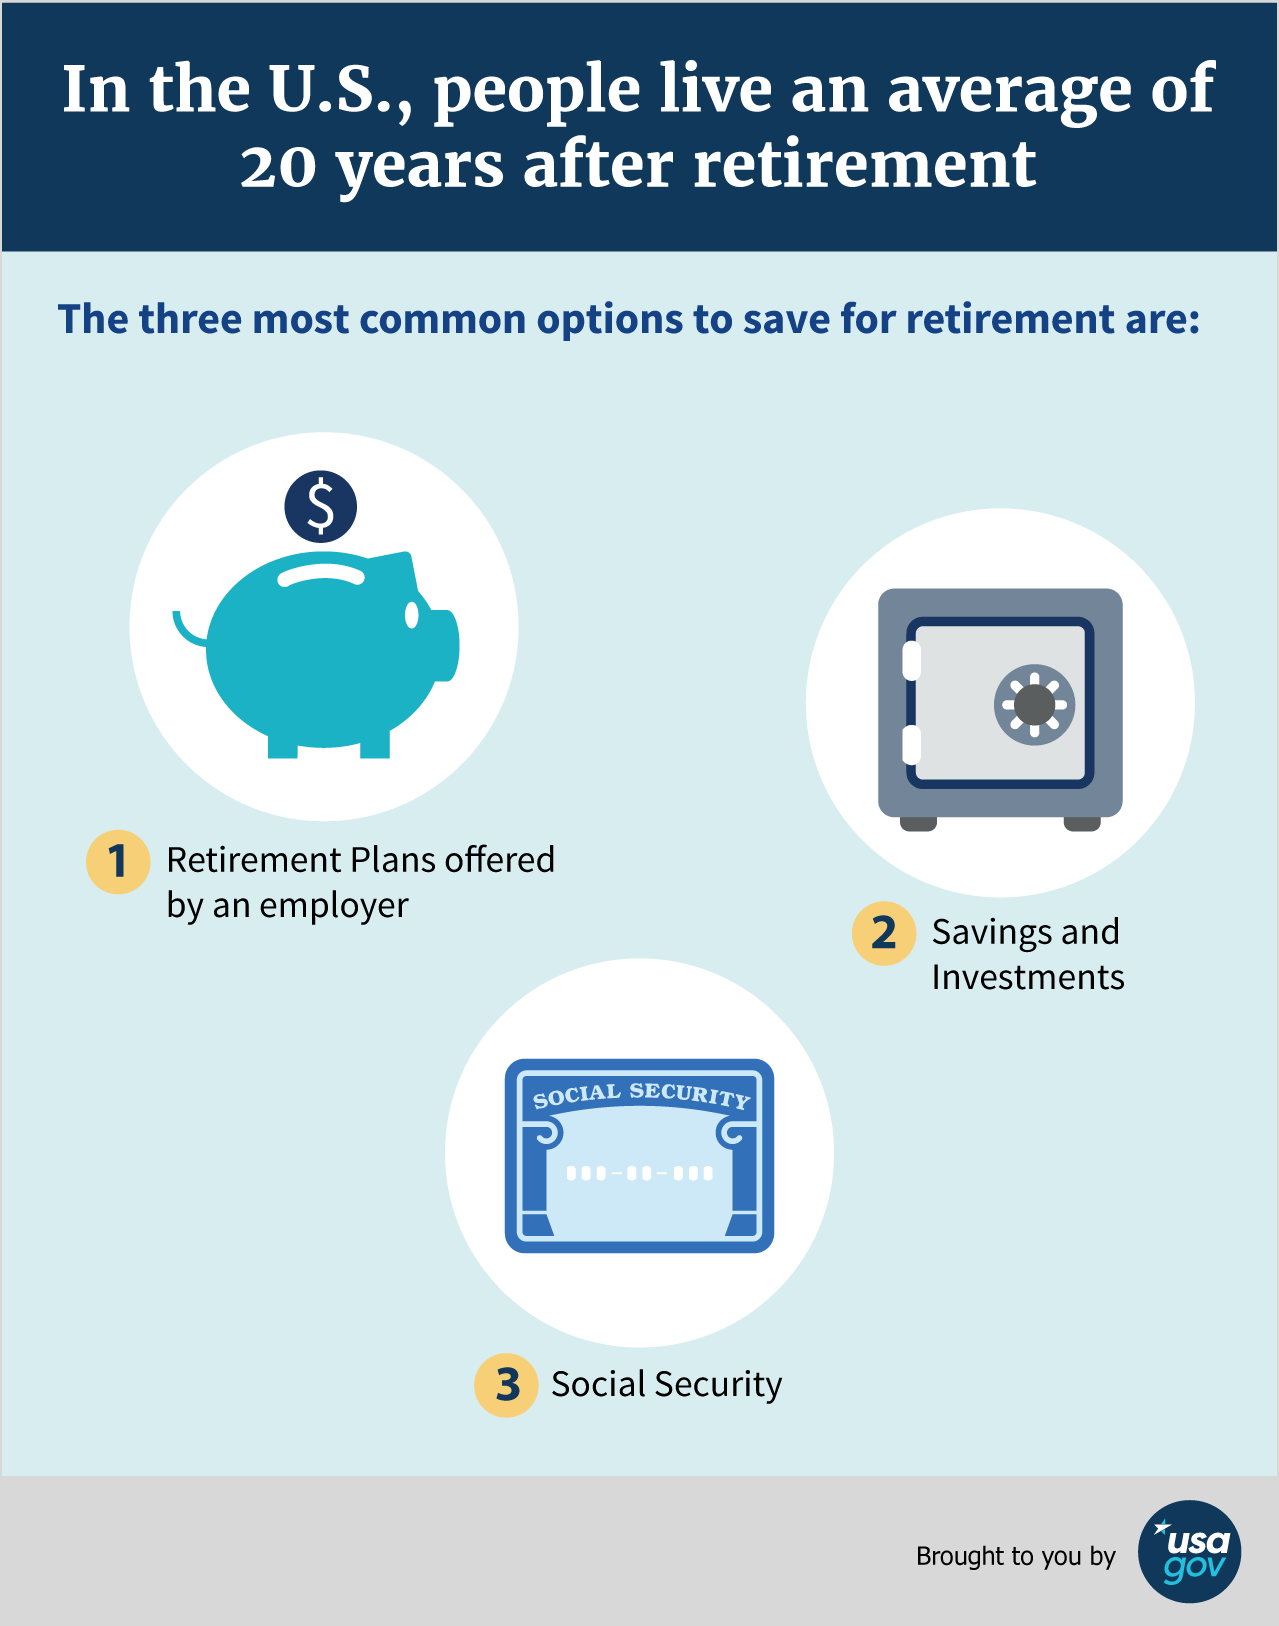 Infographic showing the ways people save for retirement in the U.S.